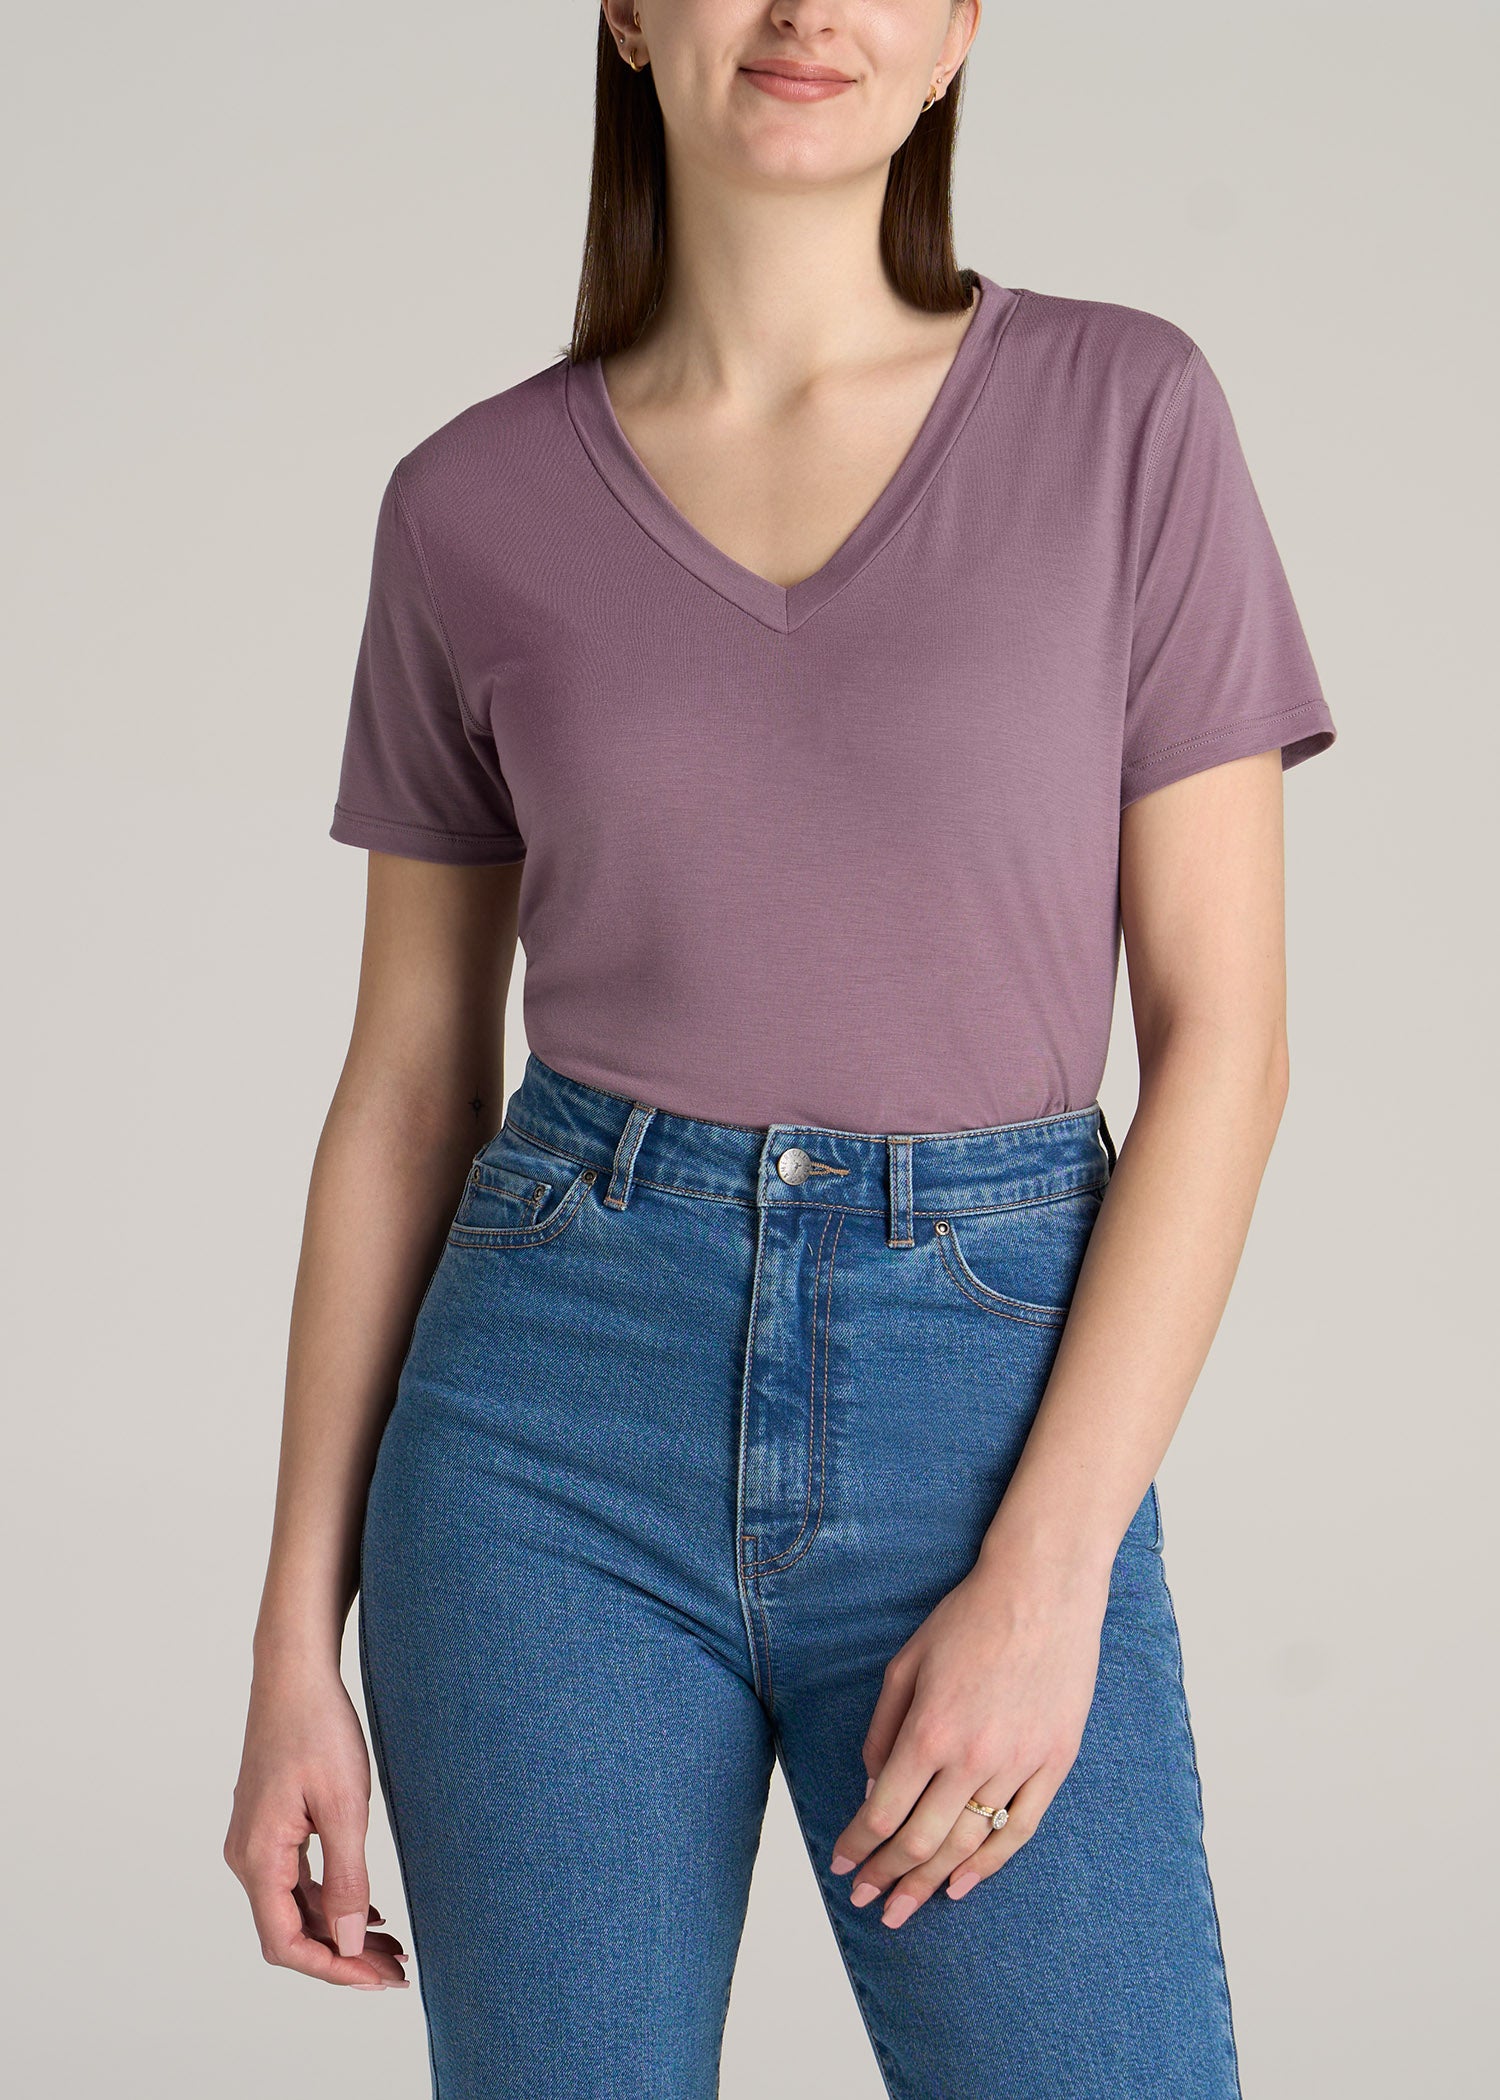 American-Tall-Women-Sleeve-V-Neck-Tee-Smoked-Mauve-front